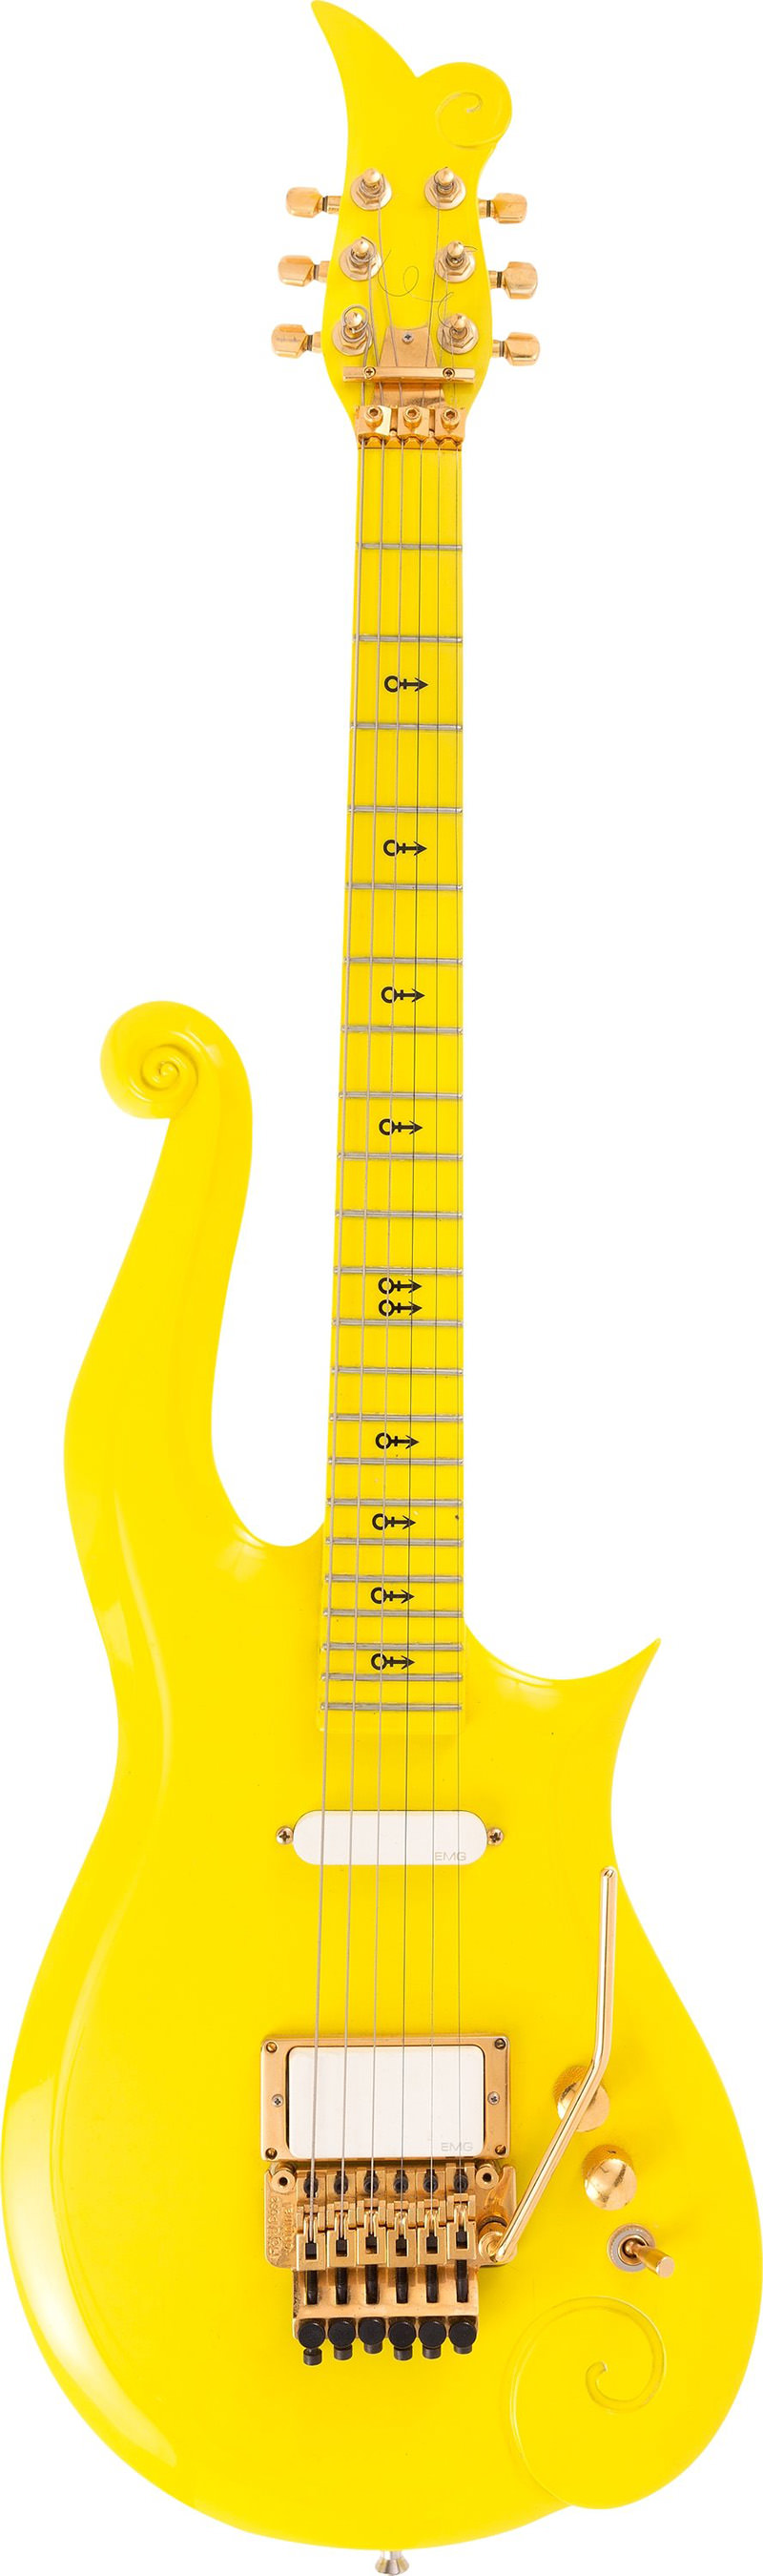 This photo provided by Heritage Auctions shows the bright yellow guitar used by Prince to perform such tunes as 